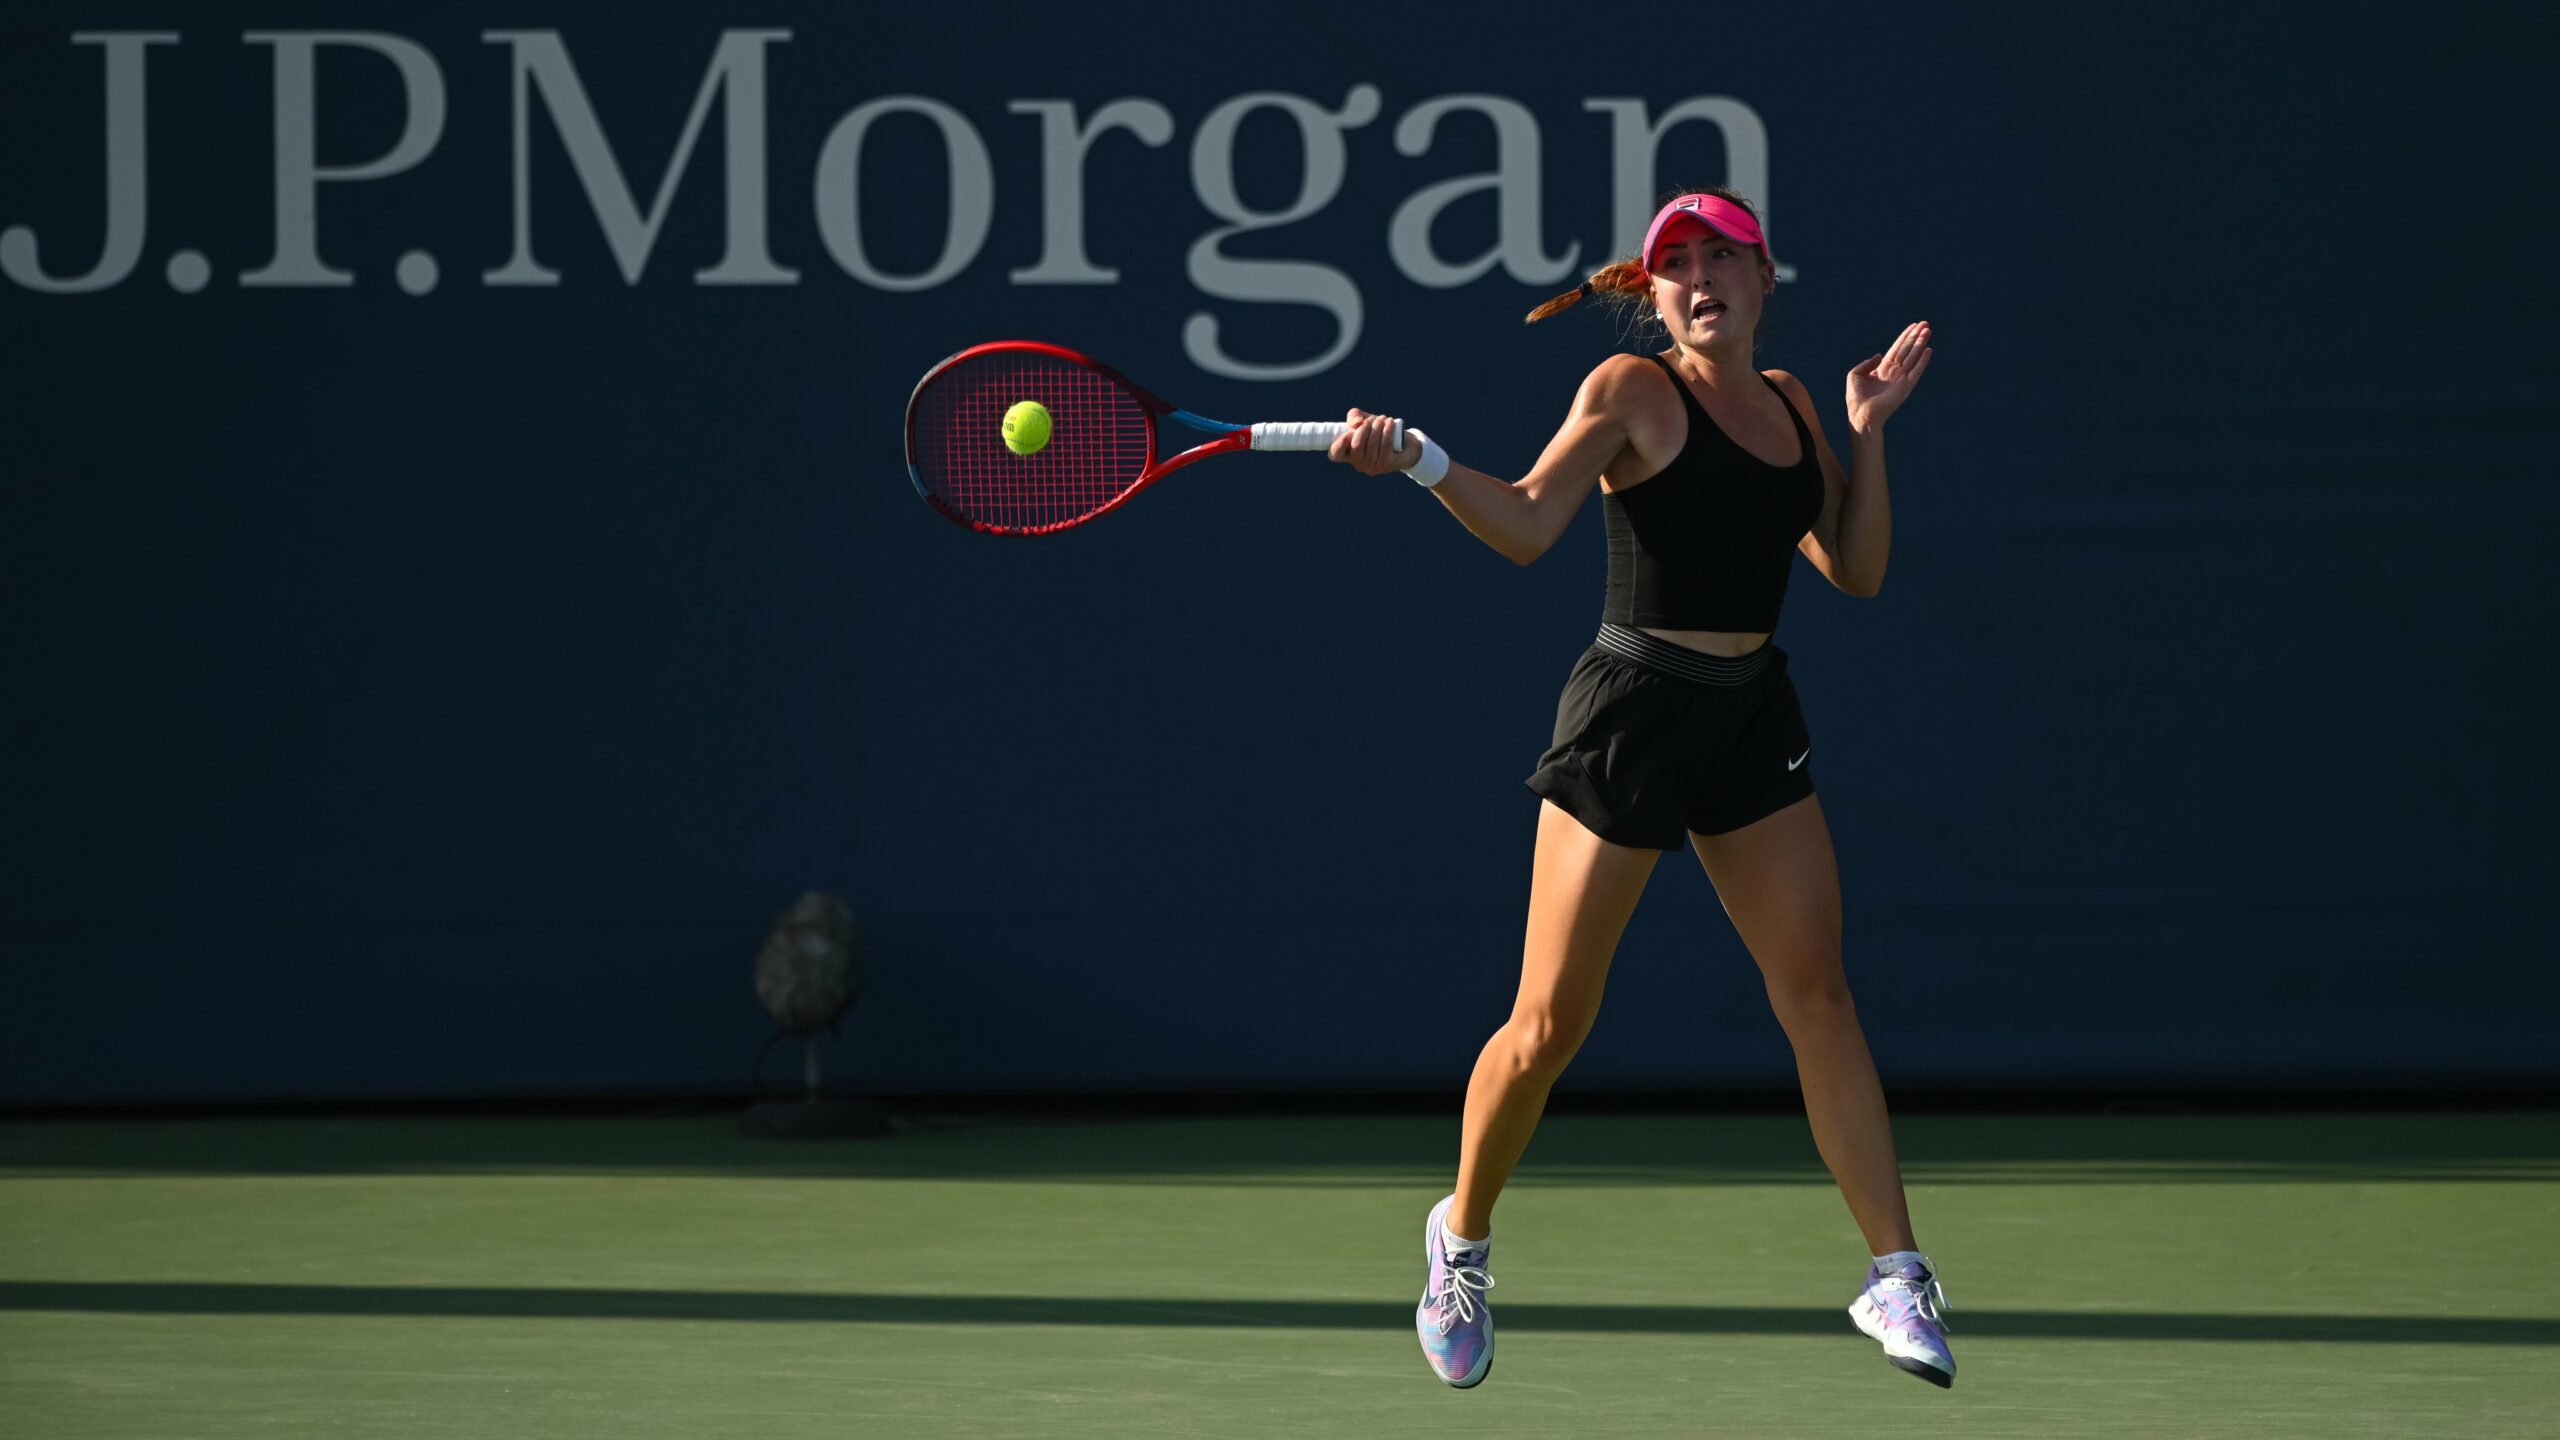 UNC’s Fiona Crawley Wins U.S. Open Qualifying Tournament; Will Play Singles and Doubles